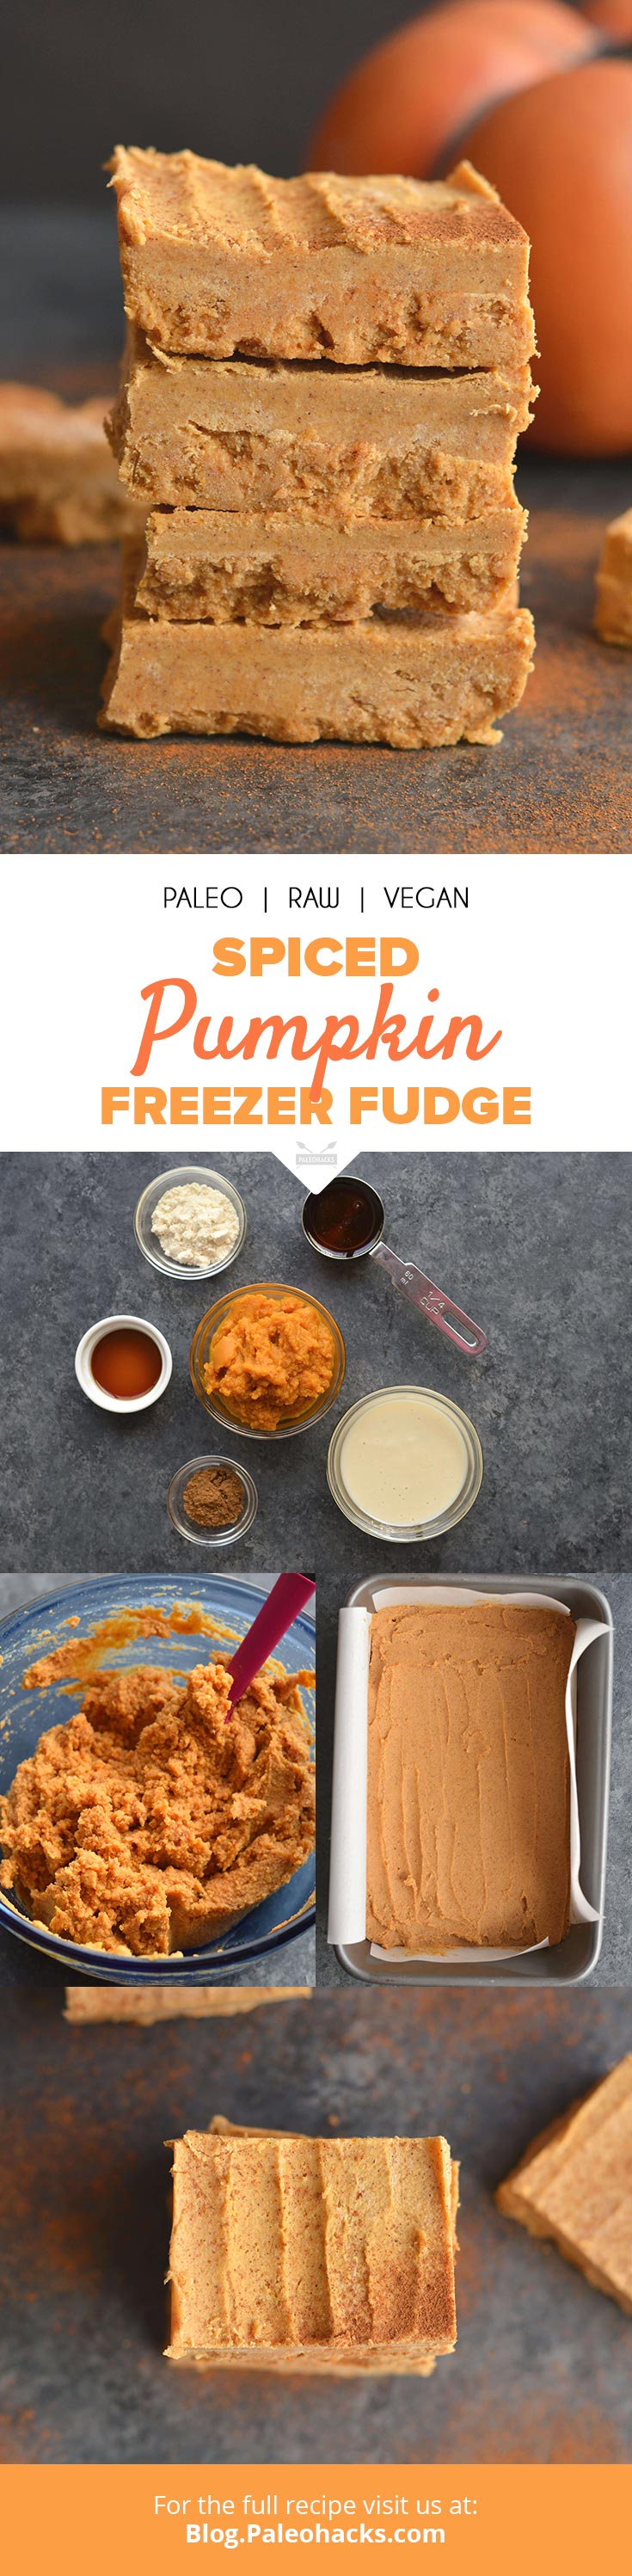 This no-bake pumpkin freezer fudge is made with coconut butter and only five other wholesome ingredients. Absolutely no processed sugar here!